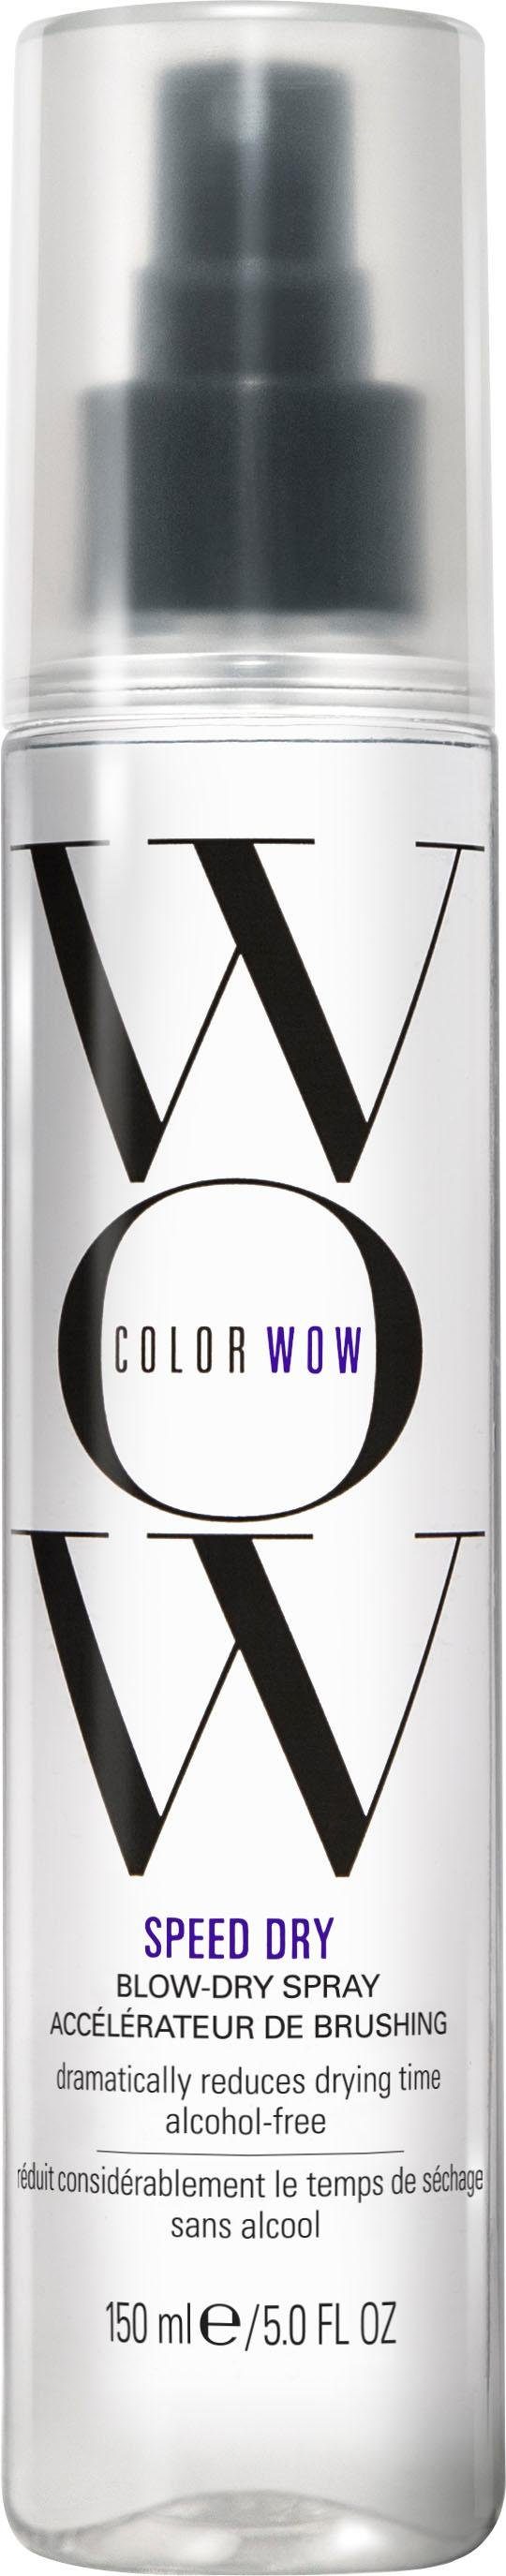 COLOR Dry WOW Föhnlotion Speed